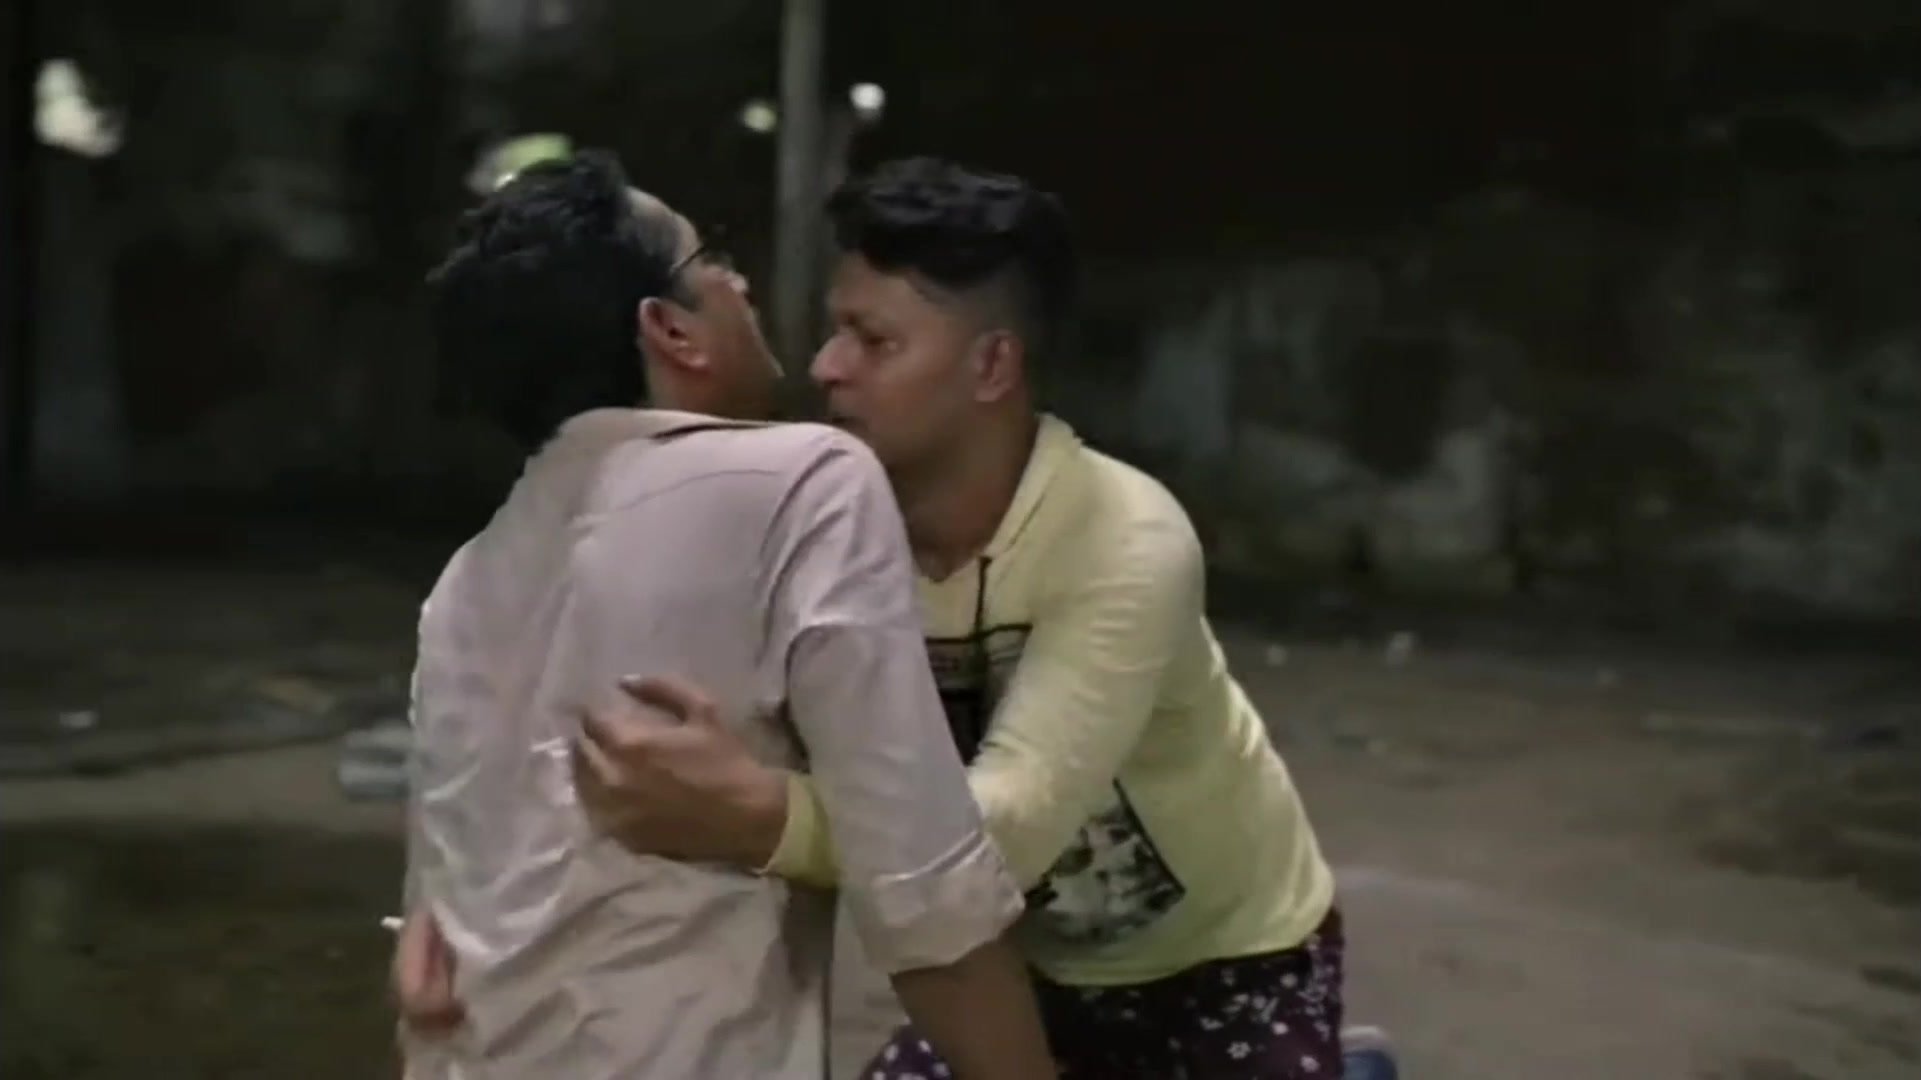 Gay kissing scene from a Bengal movie